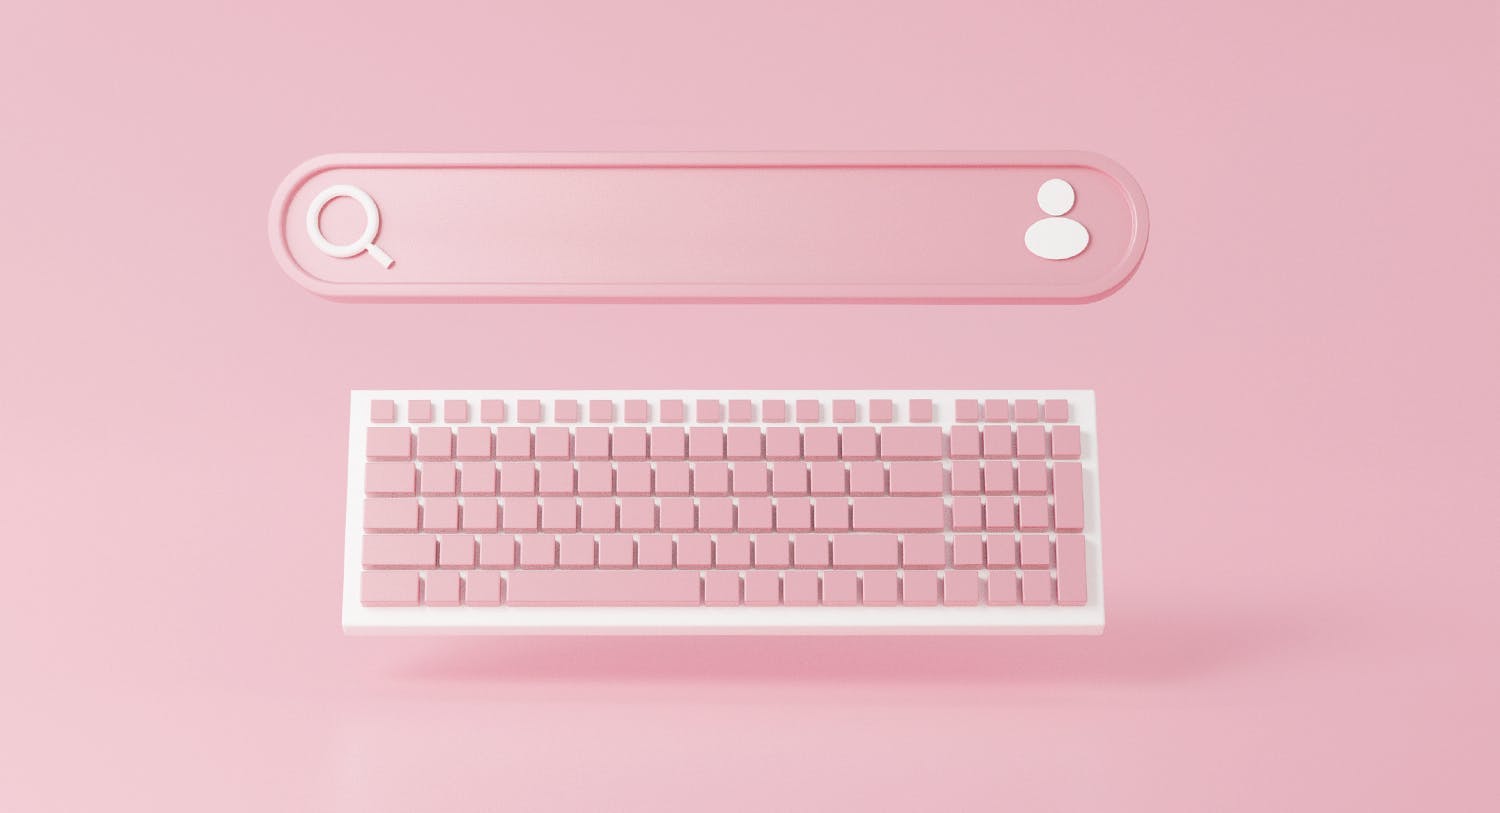 This image depicts a keyboard with pink keys and a pink search bar hovering above. The image is being used to describe the process a customer begins with when researching products, and this blog on How to Write SEO Optimized Content can help get your content seen by your customers during this research.